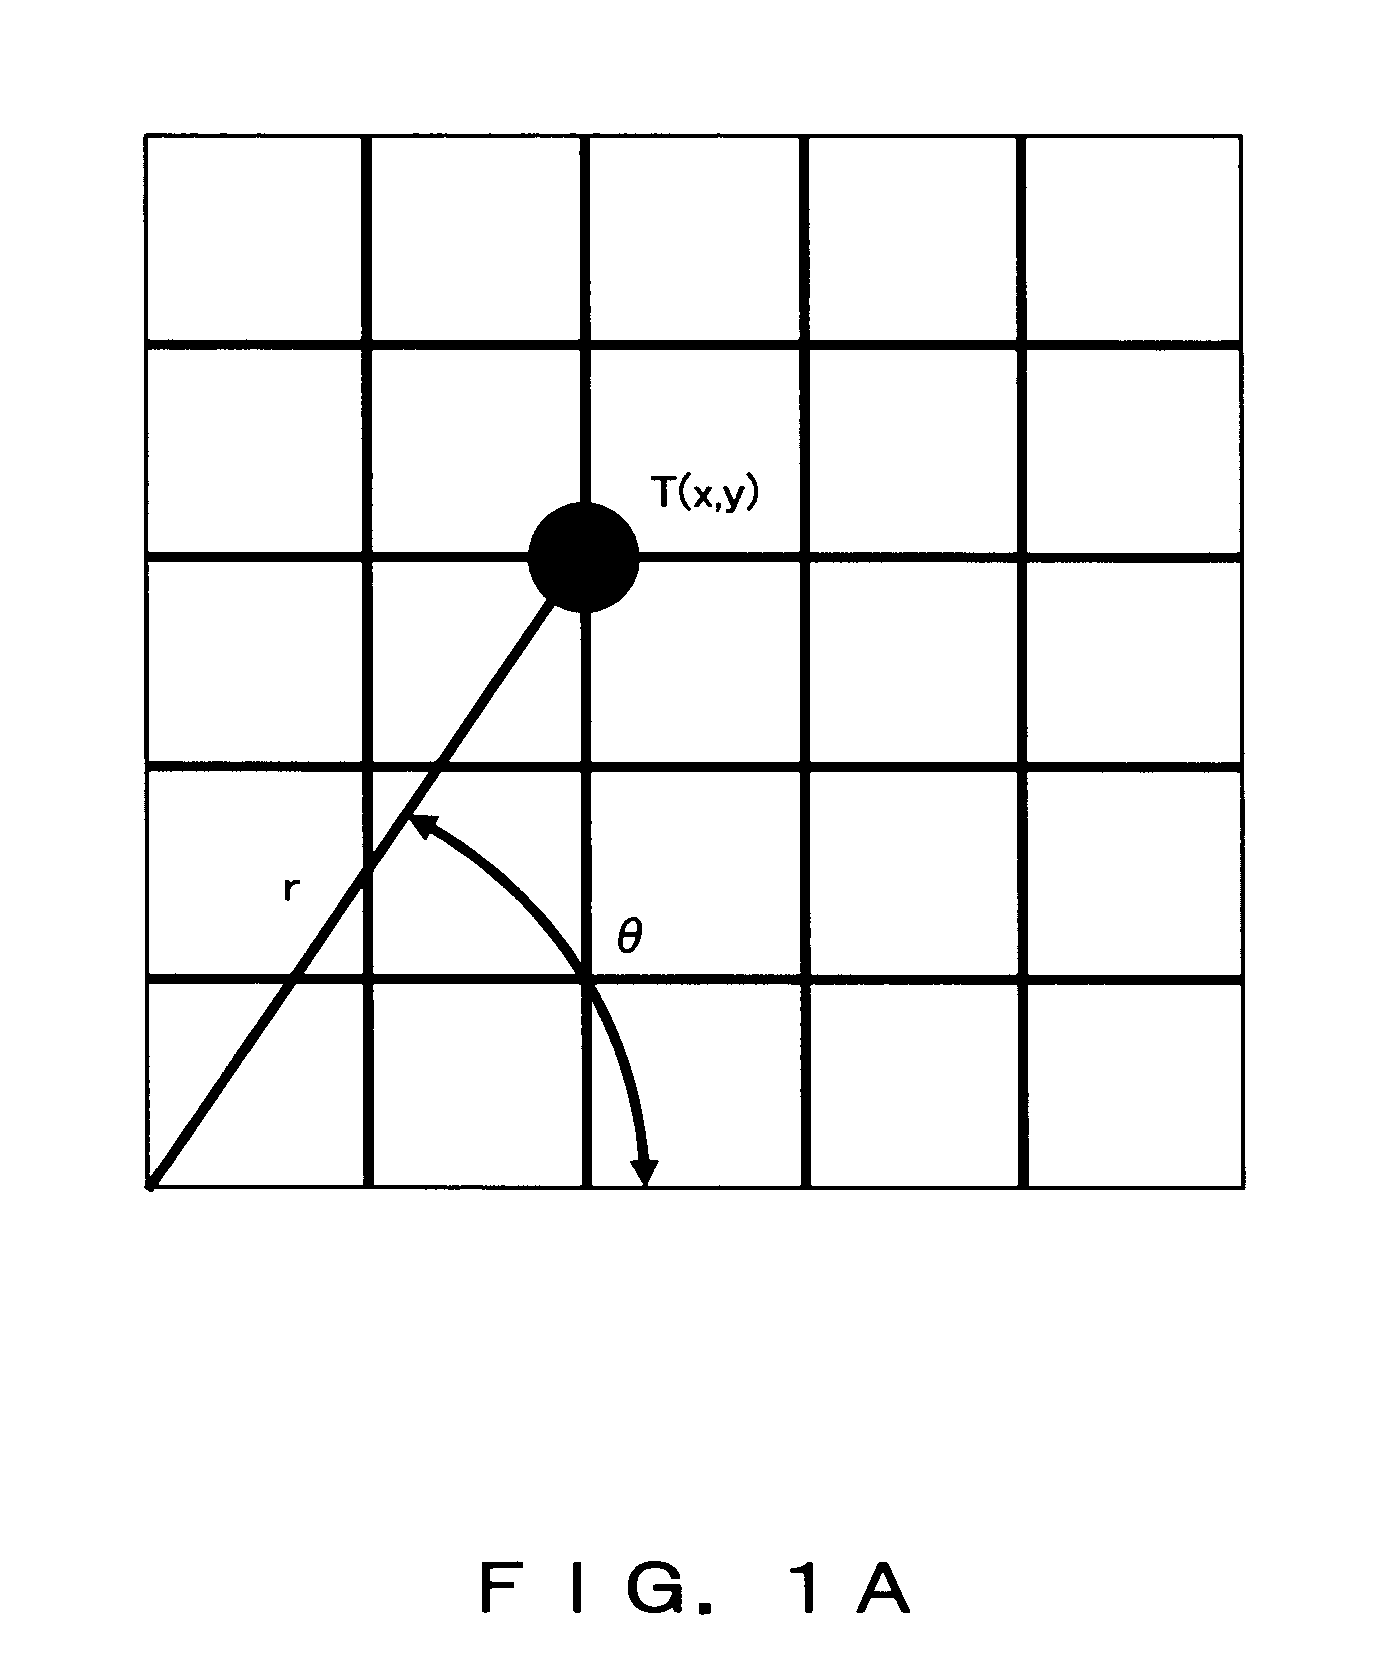 Target detection apparatus and system